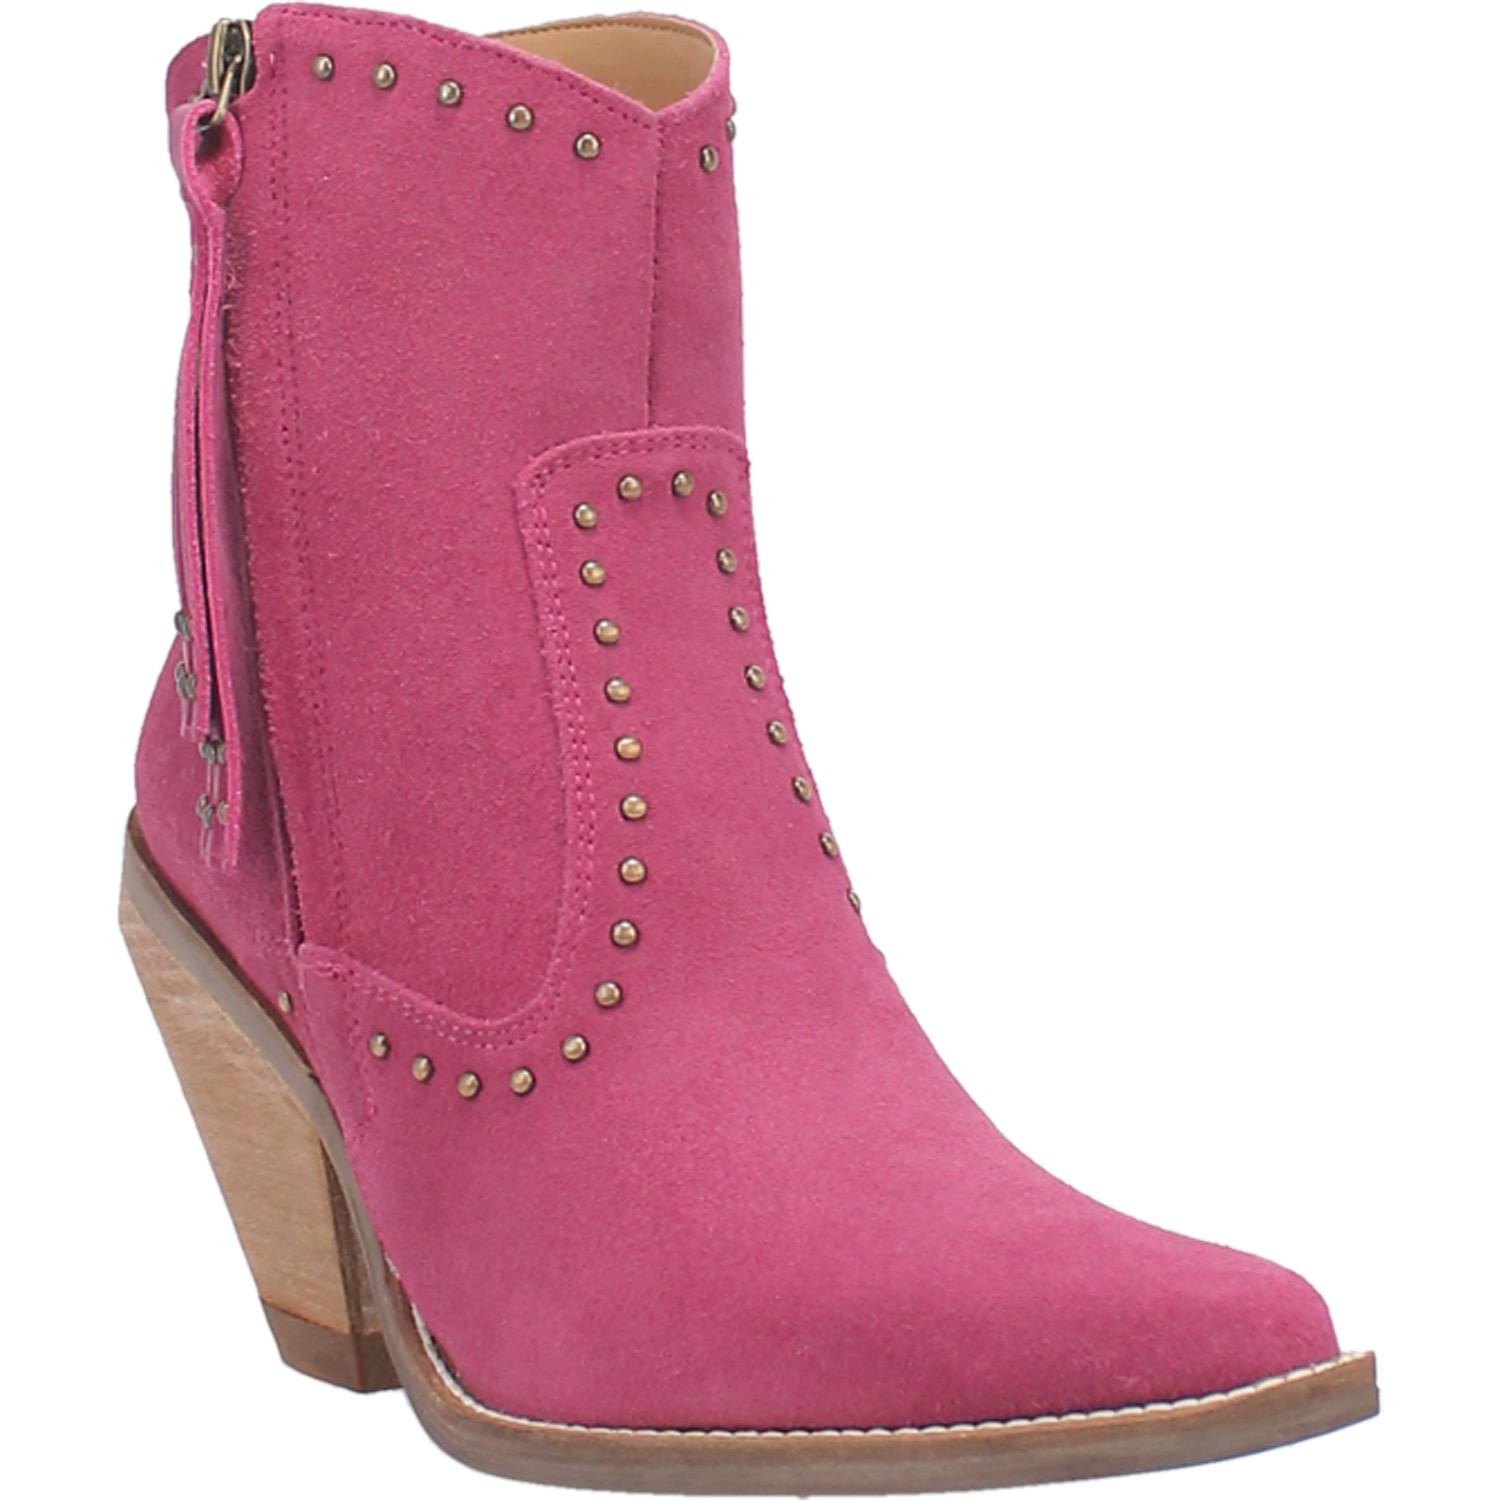 The boots shown are a low calf height bootie with a snip pointed toe made of genuine leather. The stud design and detail adds an additional edge to any outfit you pair them with. This pair is fuchsia suede.